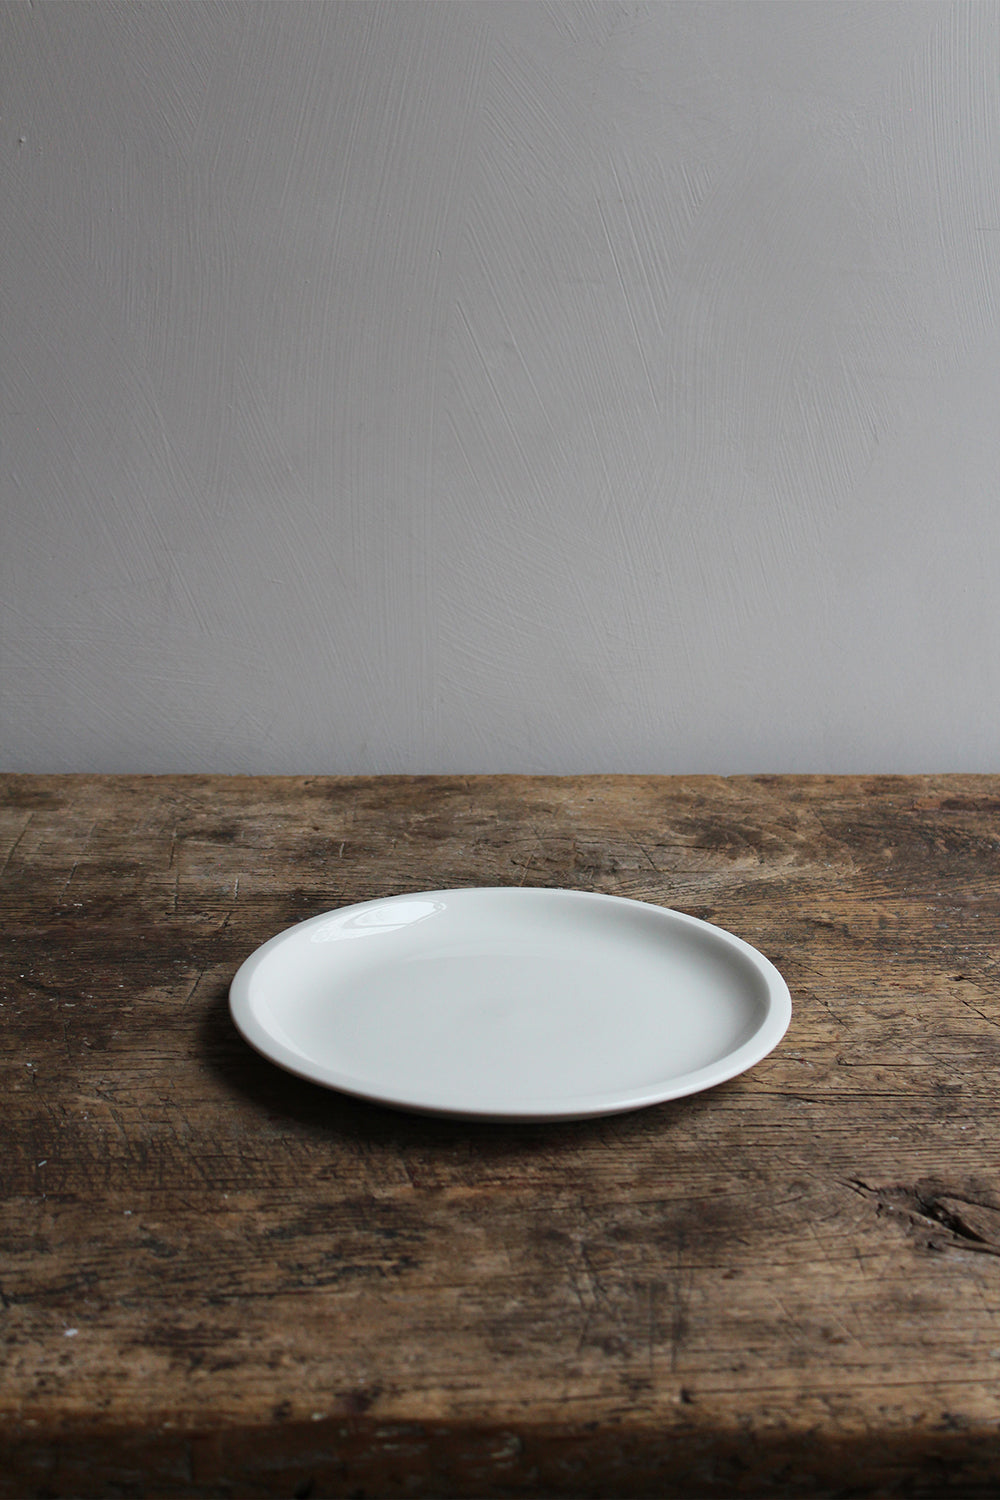 Single Antibes Plate White (24 cm) by Jars Ceramistes on wooden table.